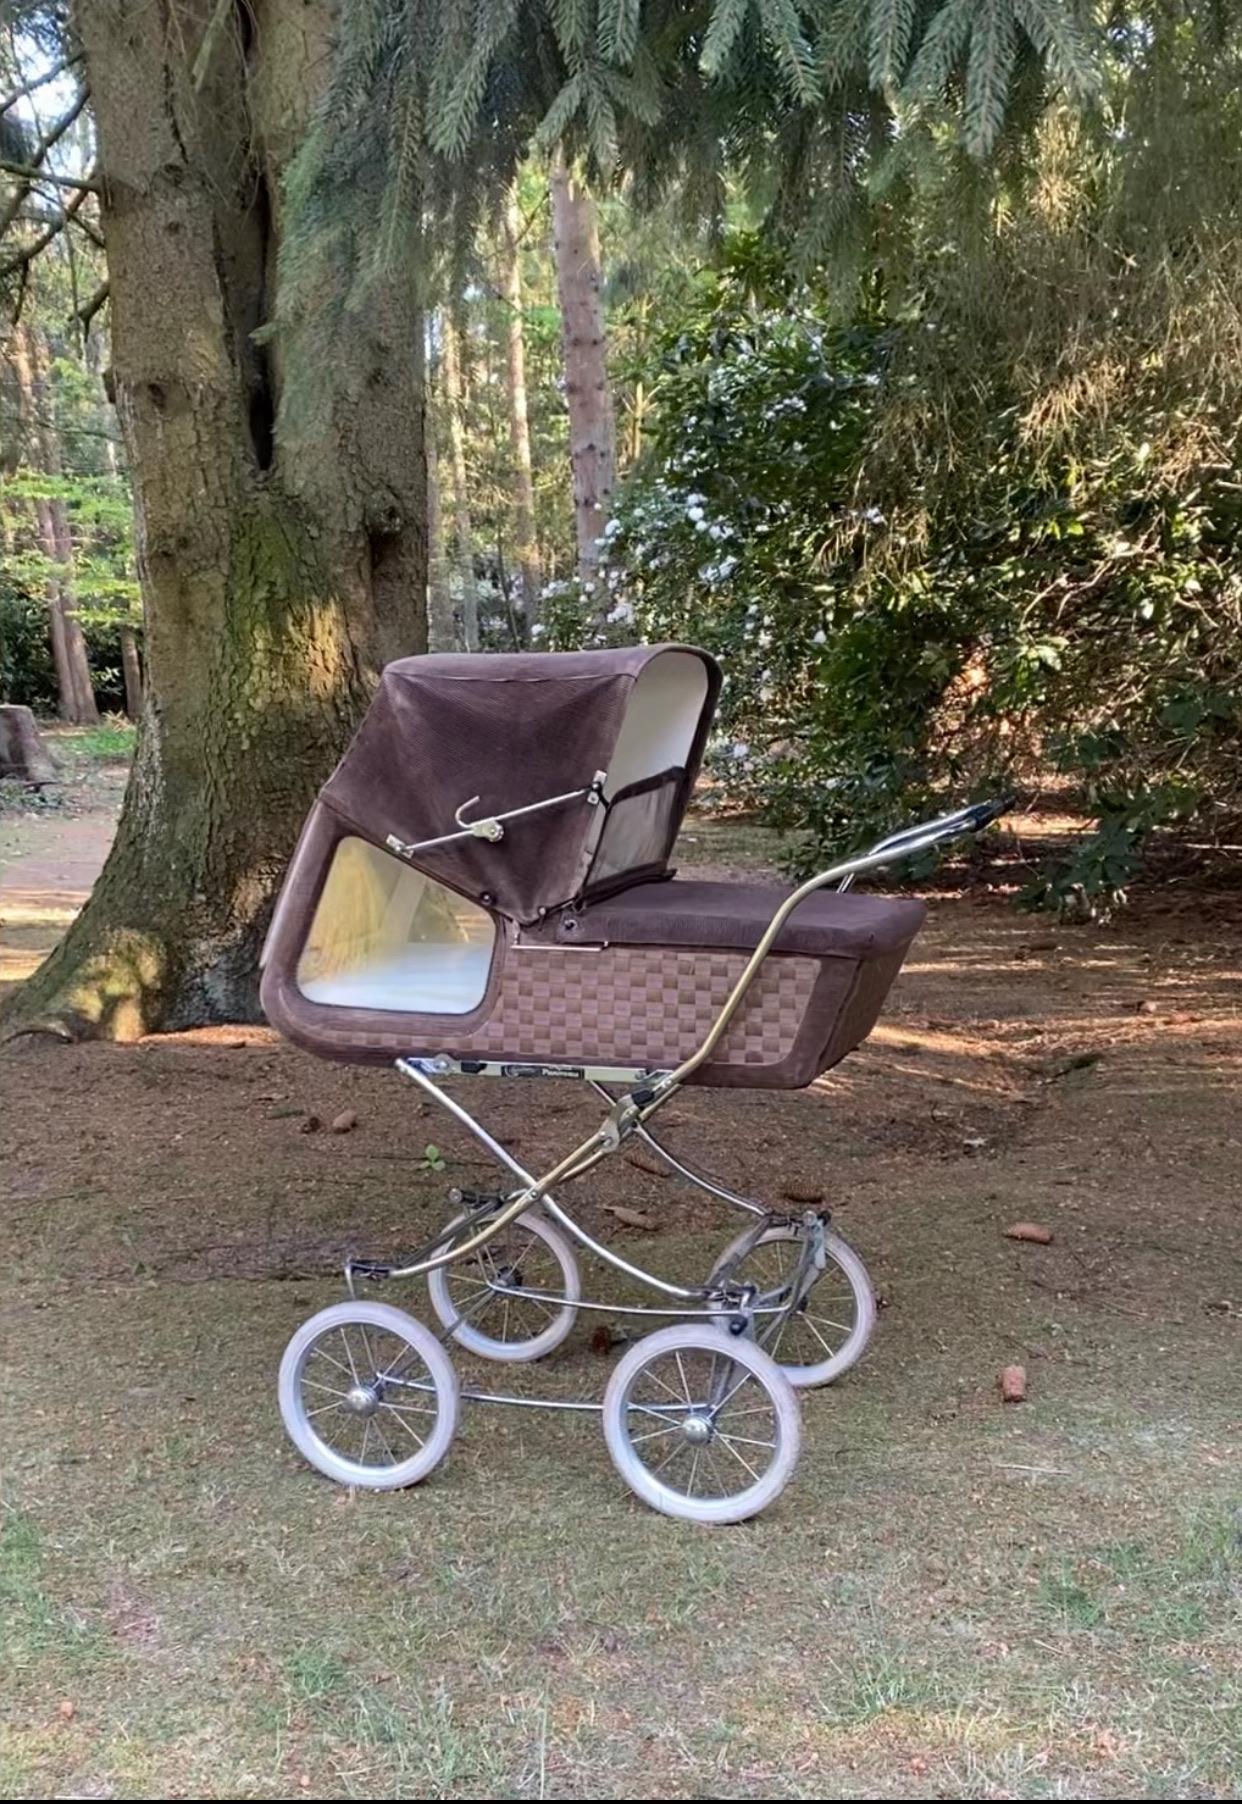 Outstanding and rare child Carriage with Panoramic view! This magnificent piece is multifunctional and can be demounted for transport. It features a Corduroy and foam woven fabric. The foam lime fabric is look a like woven cane or bamboo! The pram